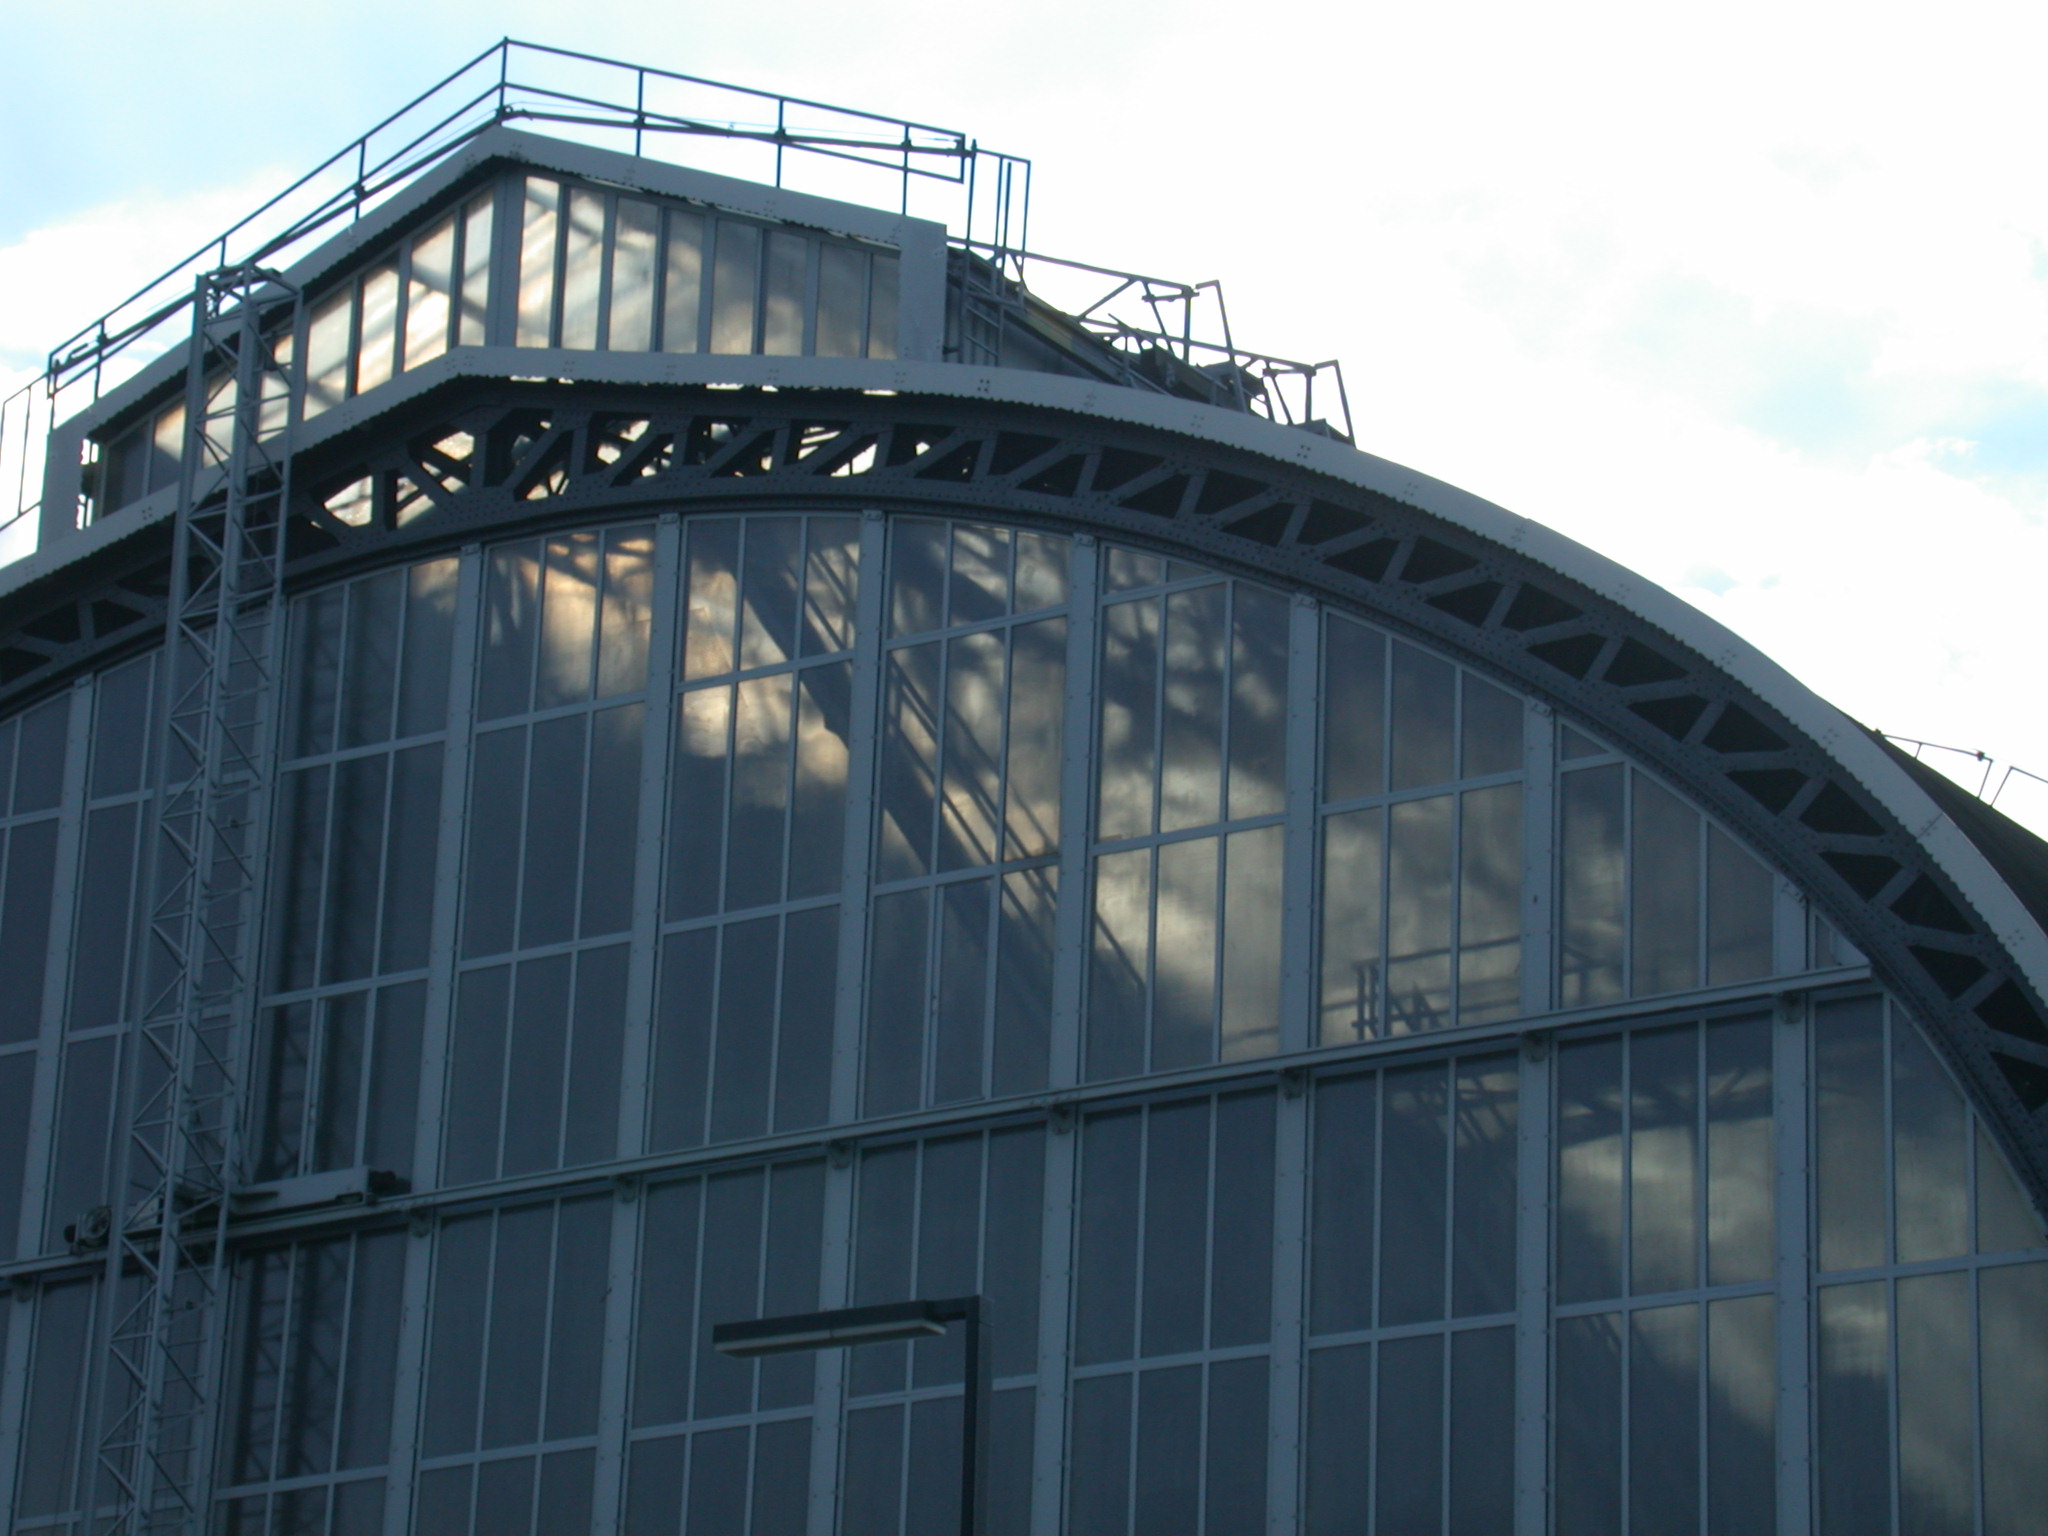 glass dome amsterdam centralstation station trainstation architecture exteriors metal steel frame framing